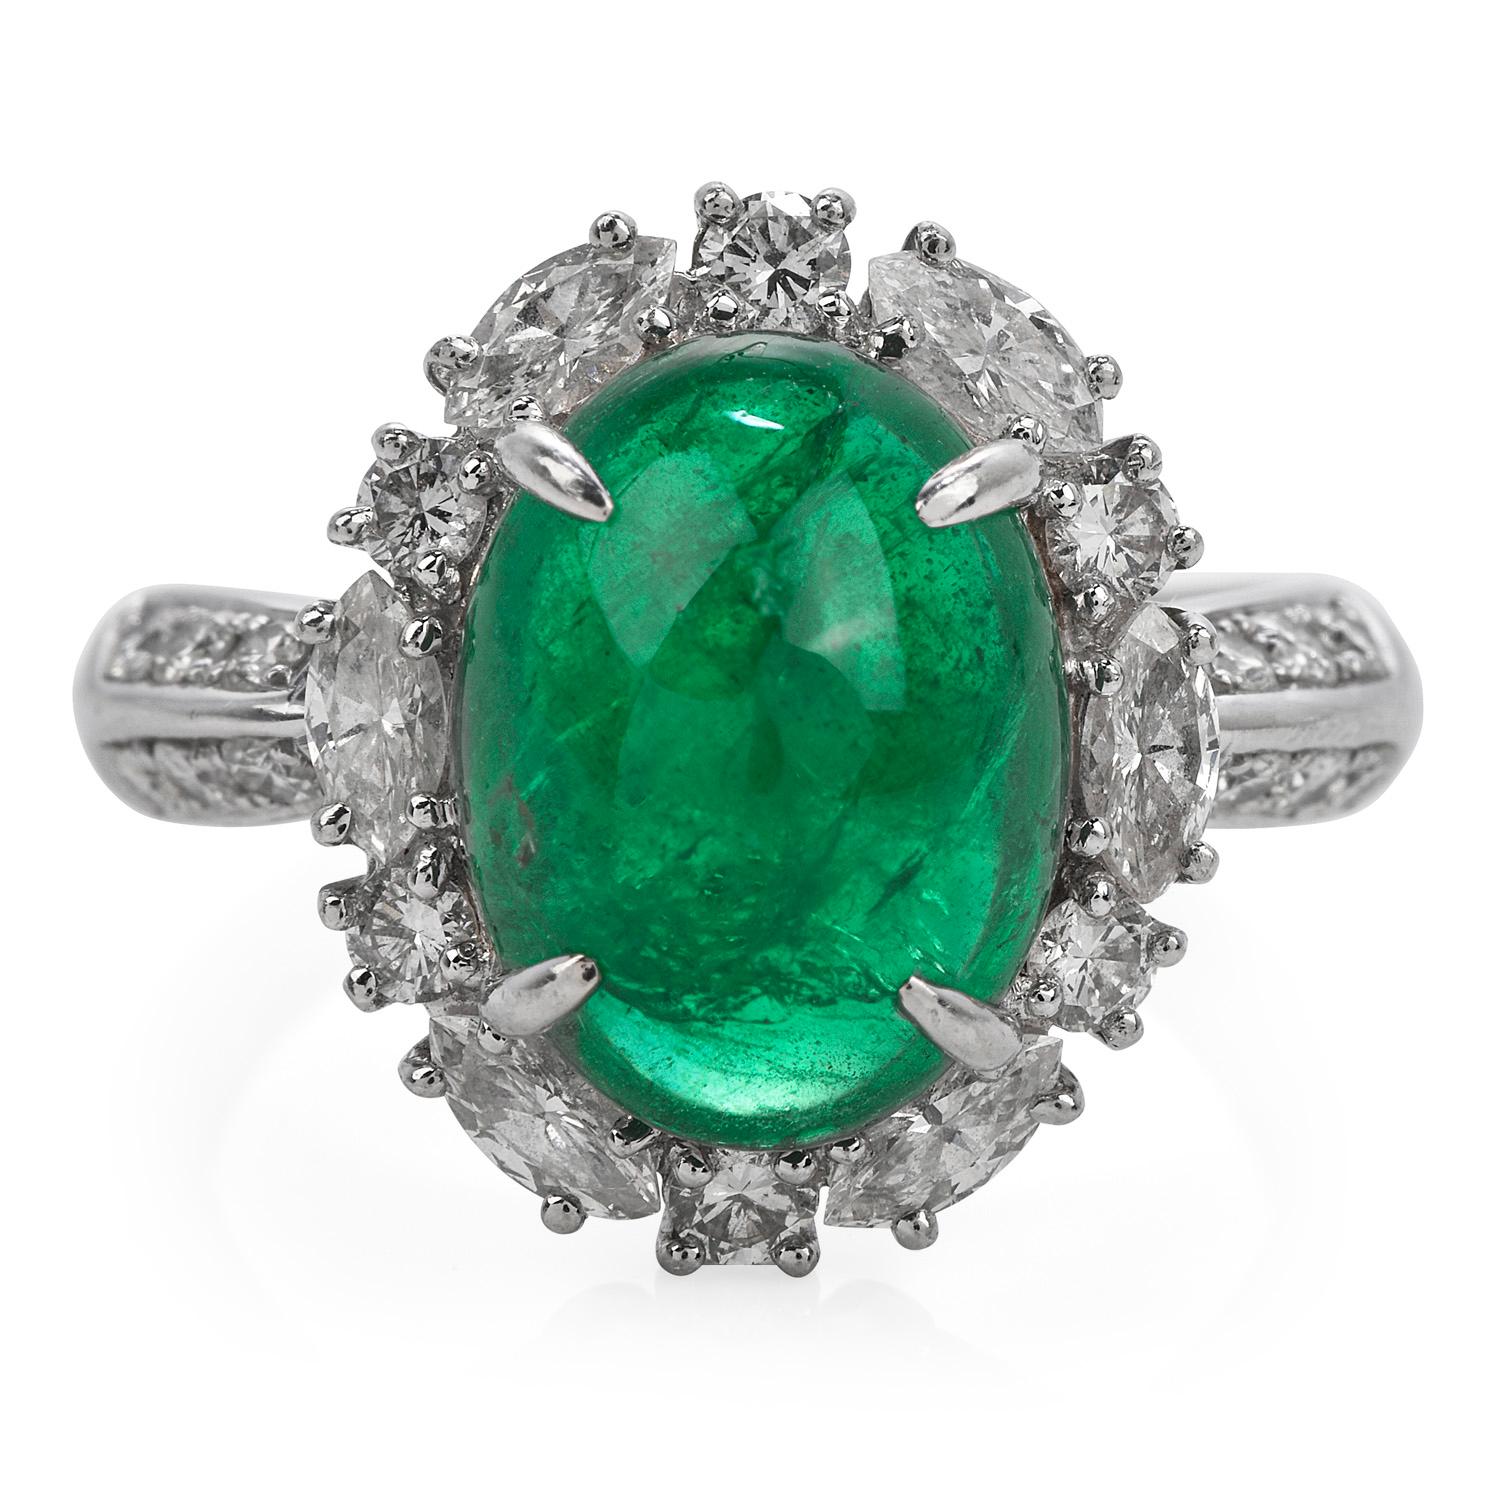 This exquisite GIA Genuine Emerald & Diamond Cocktail Ring is expertly crafted in solid platinum with a total weight of 9.54 grams.

The emerald with a weight of approx. 5.17 carats are surrounded by (6) round cut and (6) marquise cut genuine